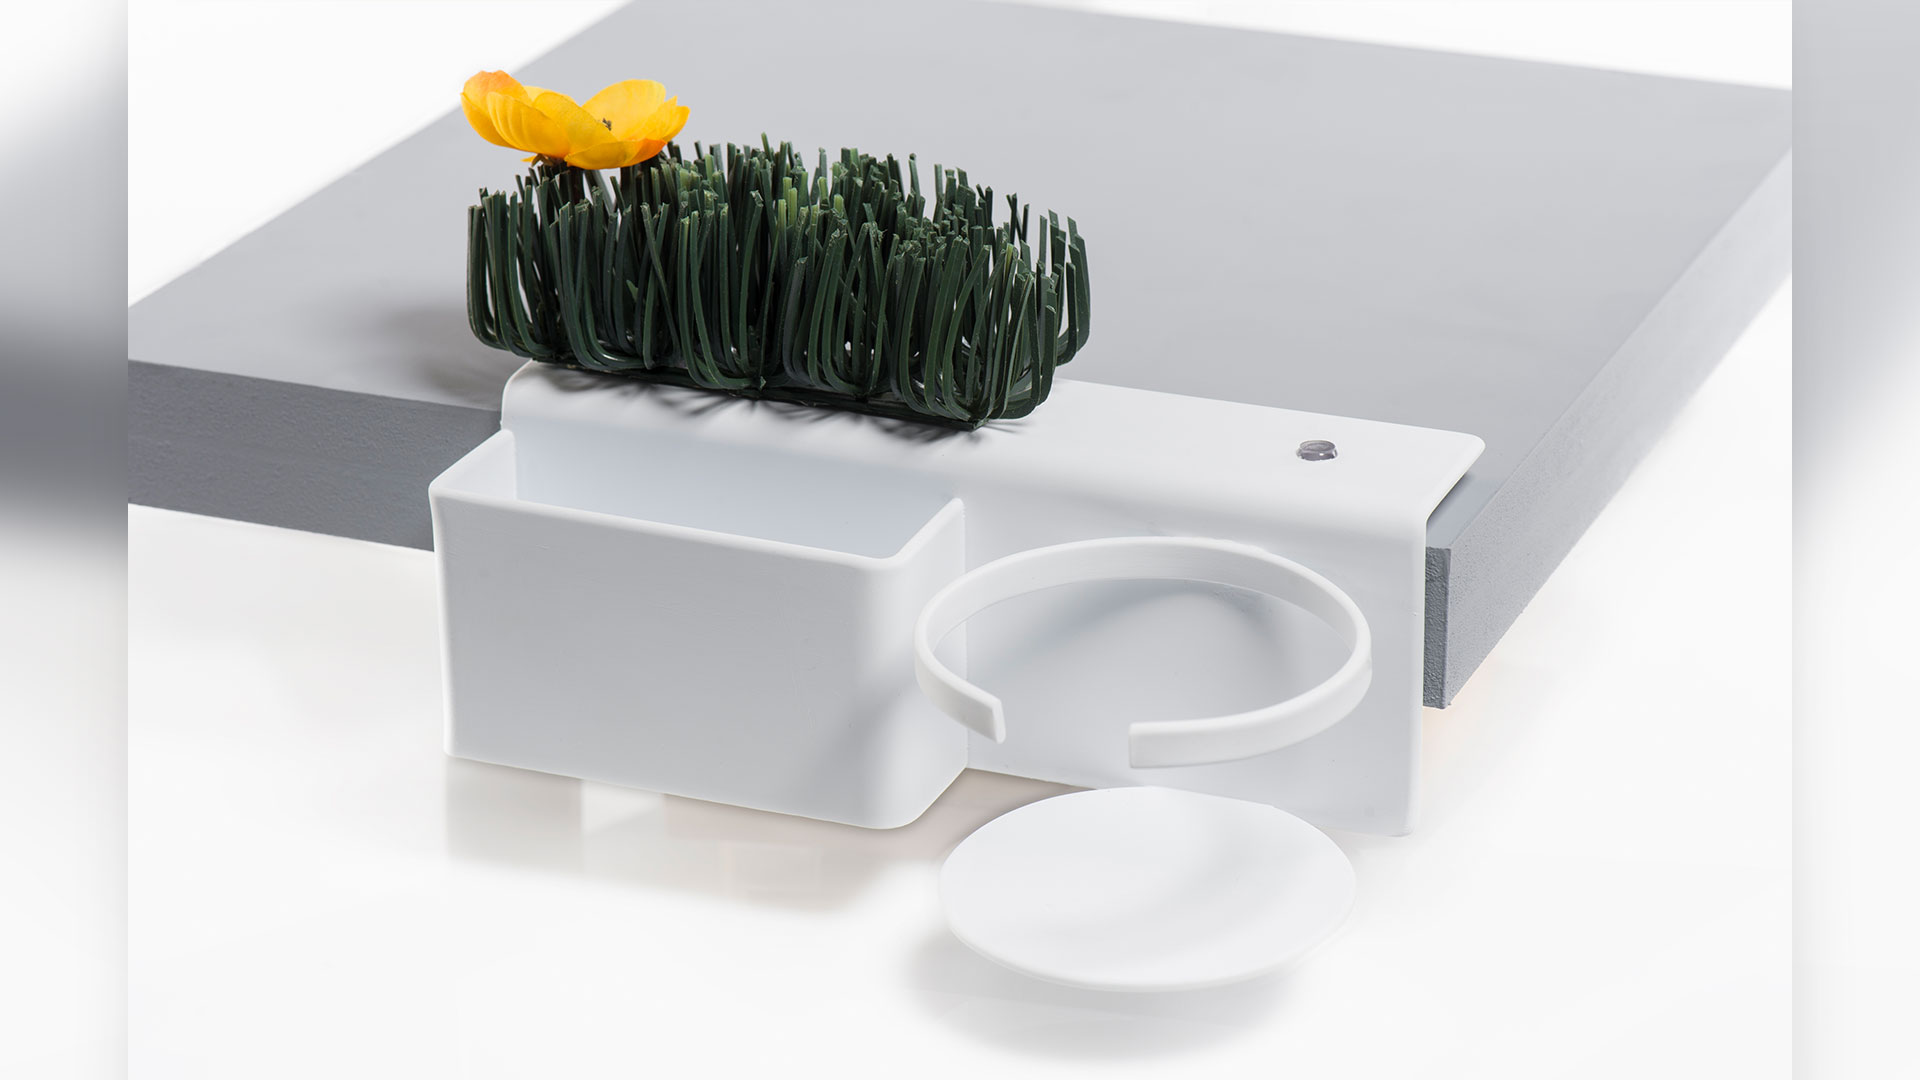 White Deskside shelf attached to side of table top a rectangular slot, fake greenery above slot, a cup holder to the right of slot